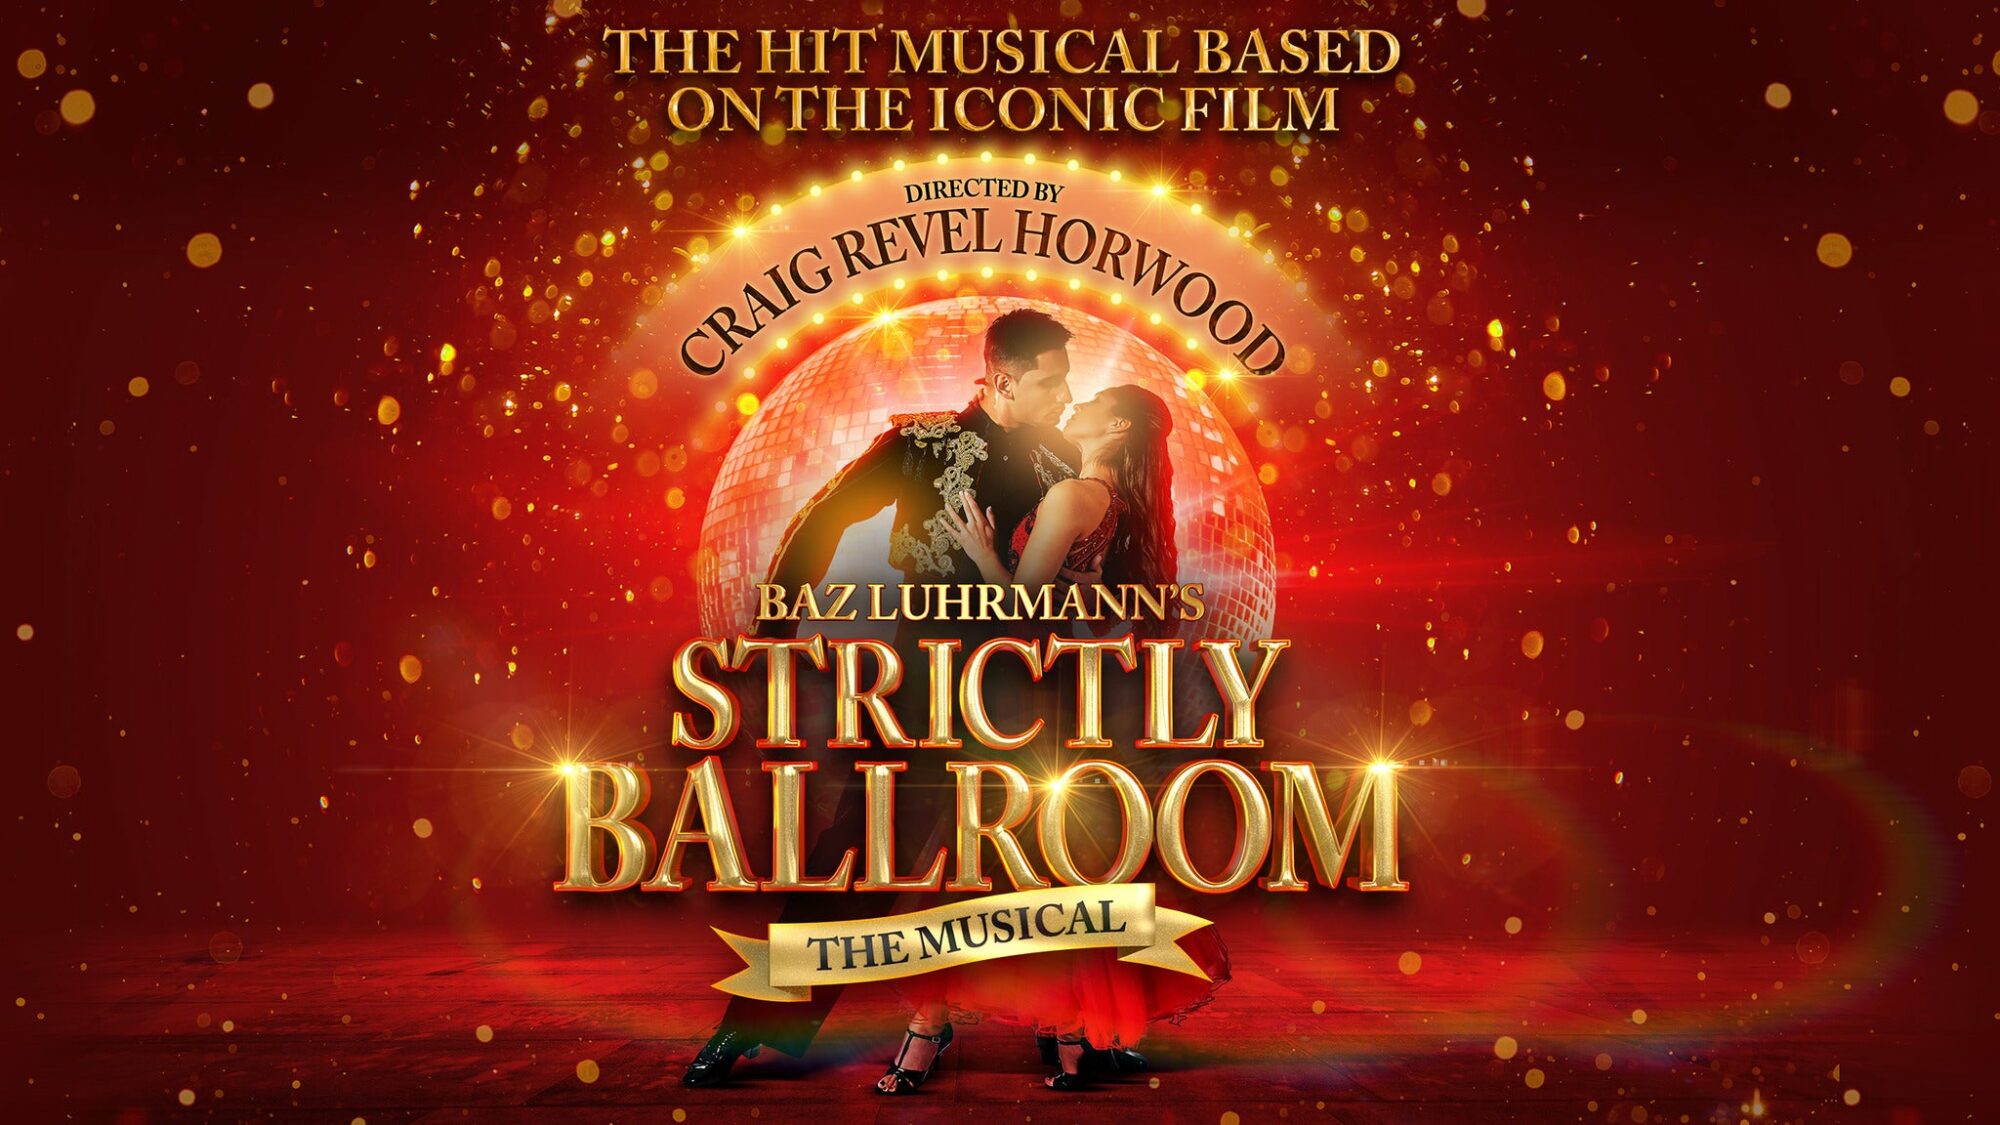 Image name Strictly Ballroom The Musical at Hull New Theatre Hull the 8 image from the post Events in Yorkshire.com.